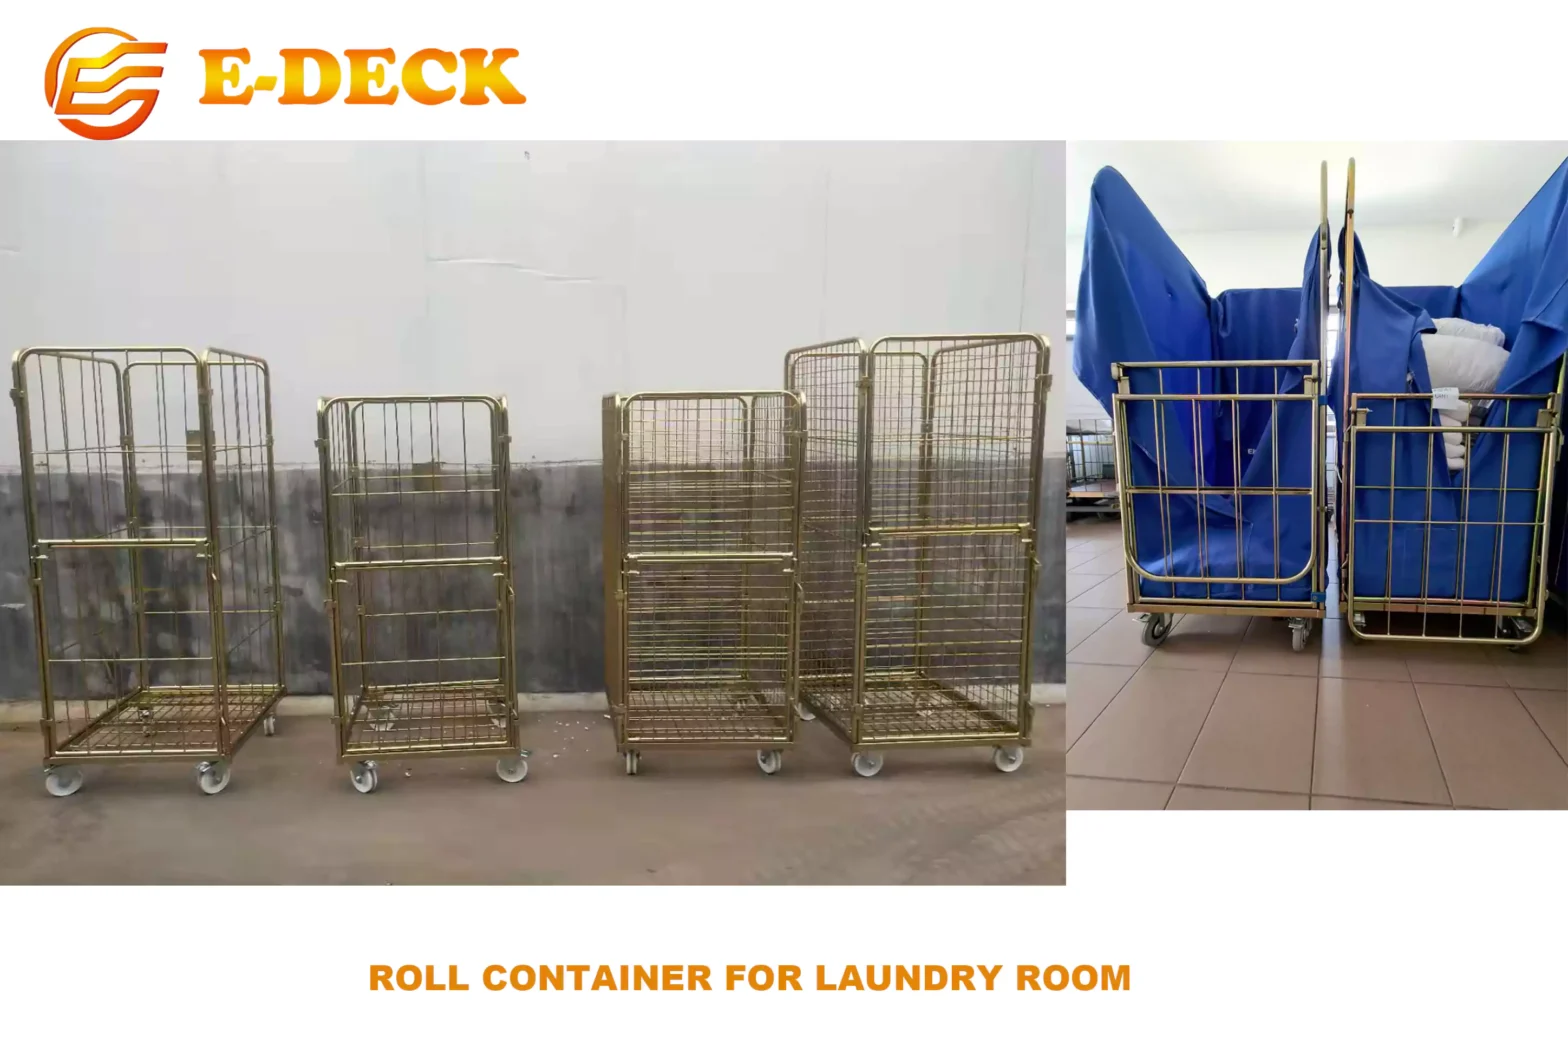 Sort Your Facility and Stocks with Top-Grade Laundry Cages